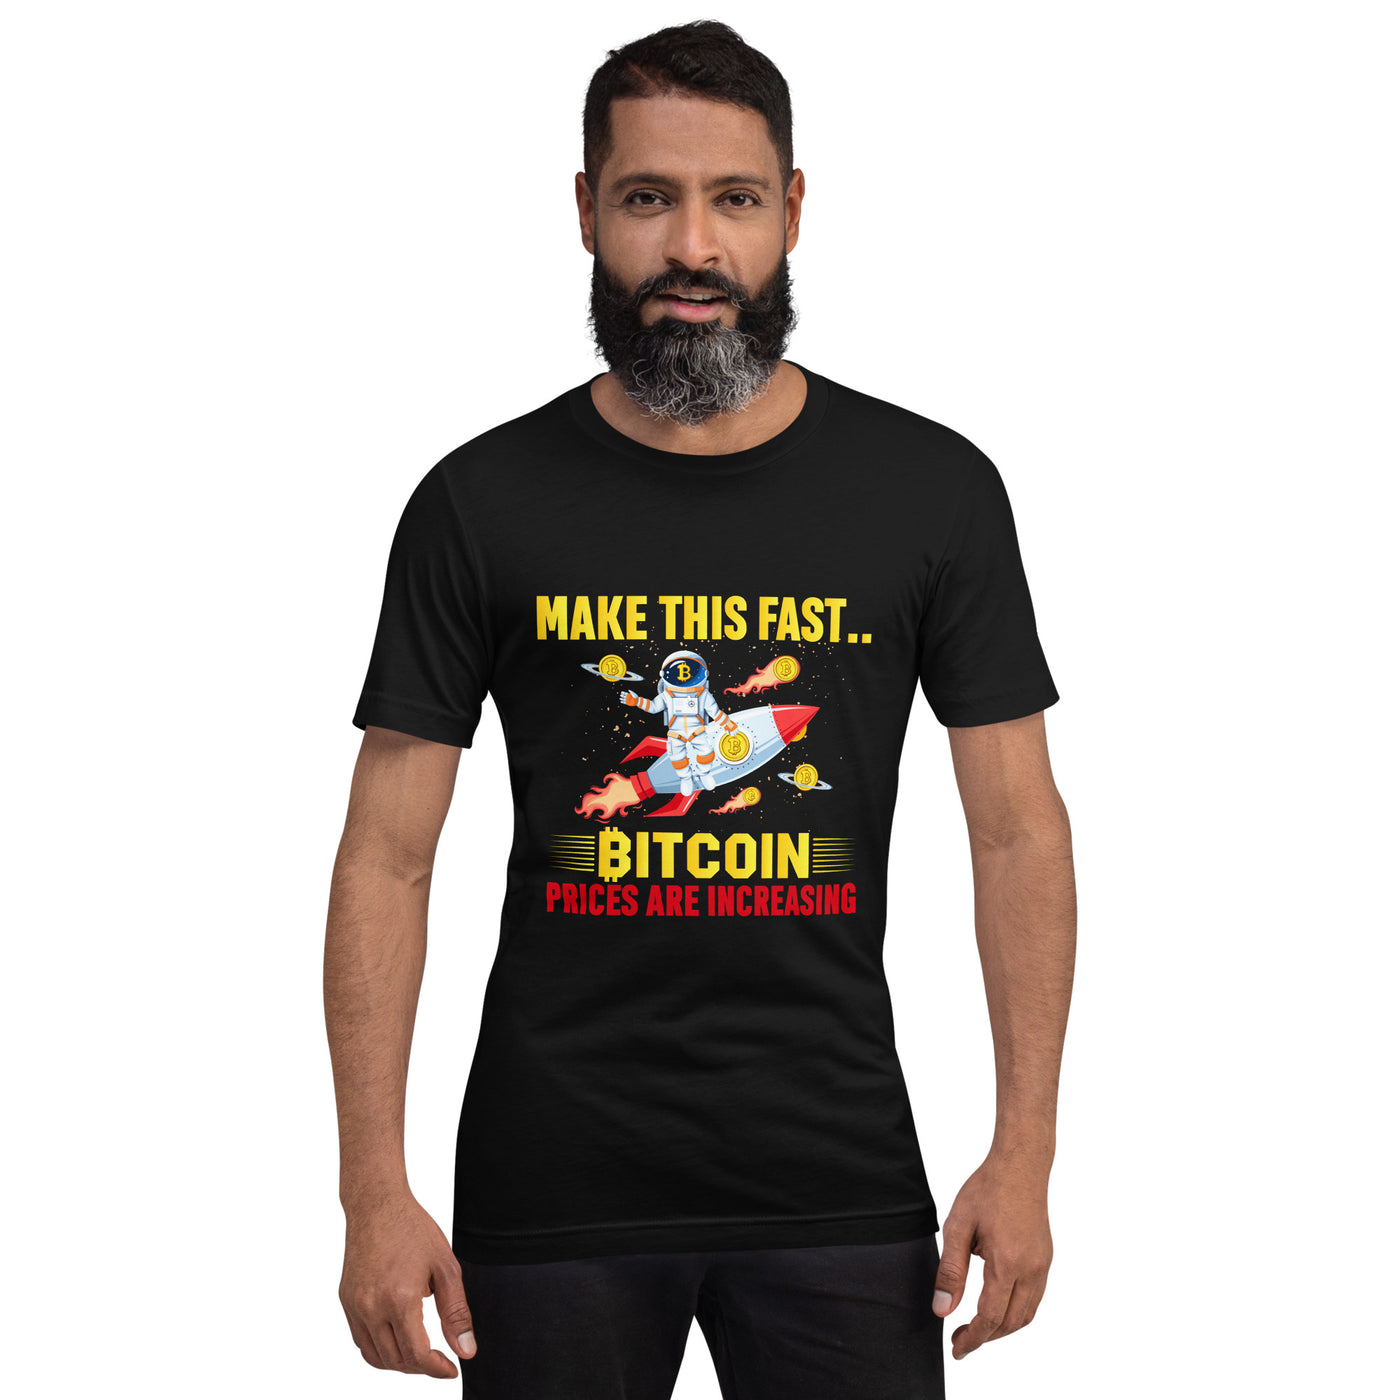 Make this Fast Bitcoin Prices are increasing - Unisex t-shirt